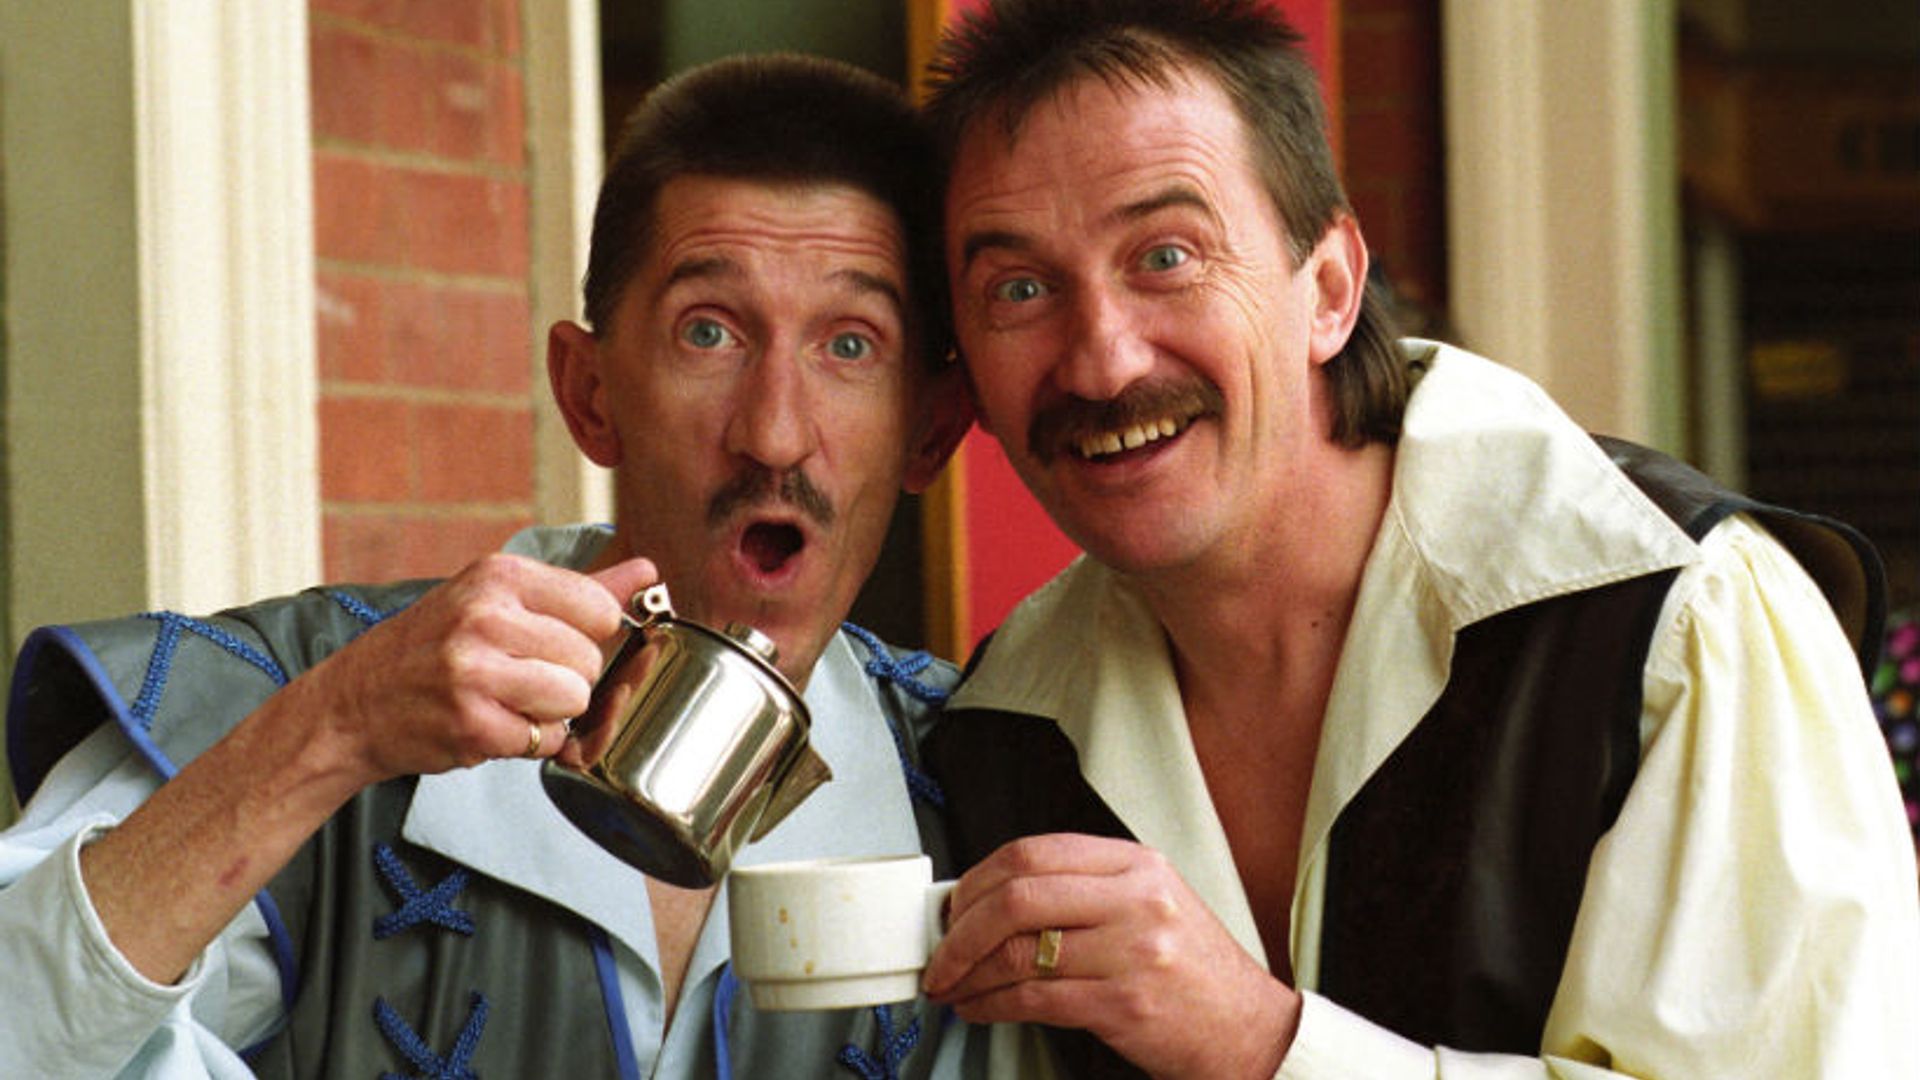 Chuckle Brothers star Barry Chuckle dies aged 73